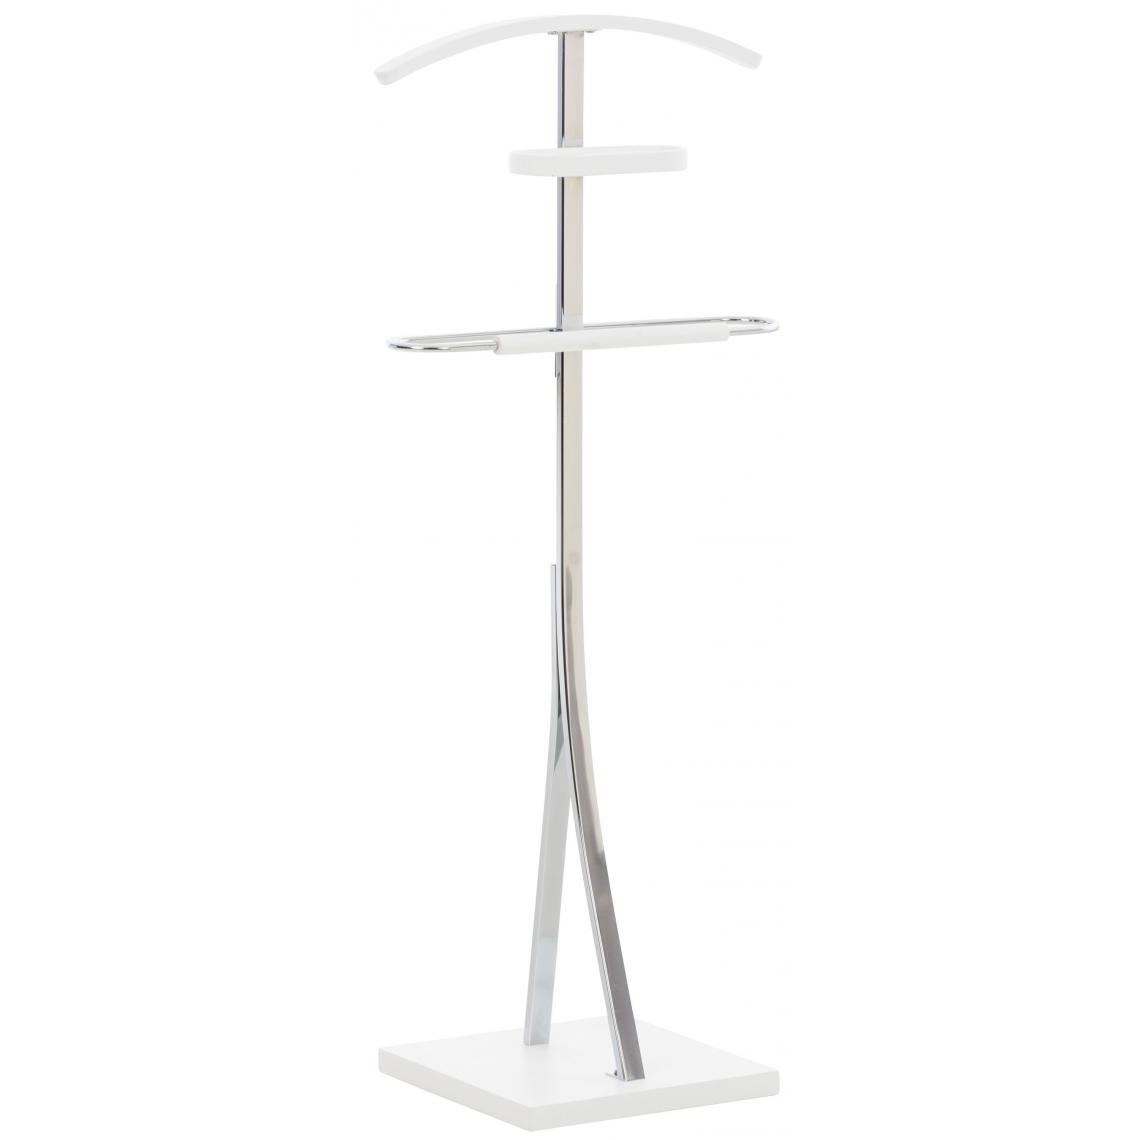 Icaverne - Chic Valet reference Honiara couleur blanc - Chaises